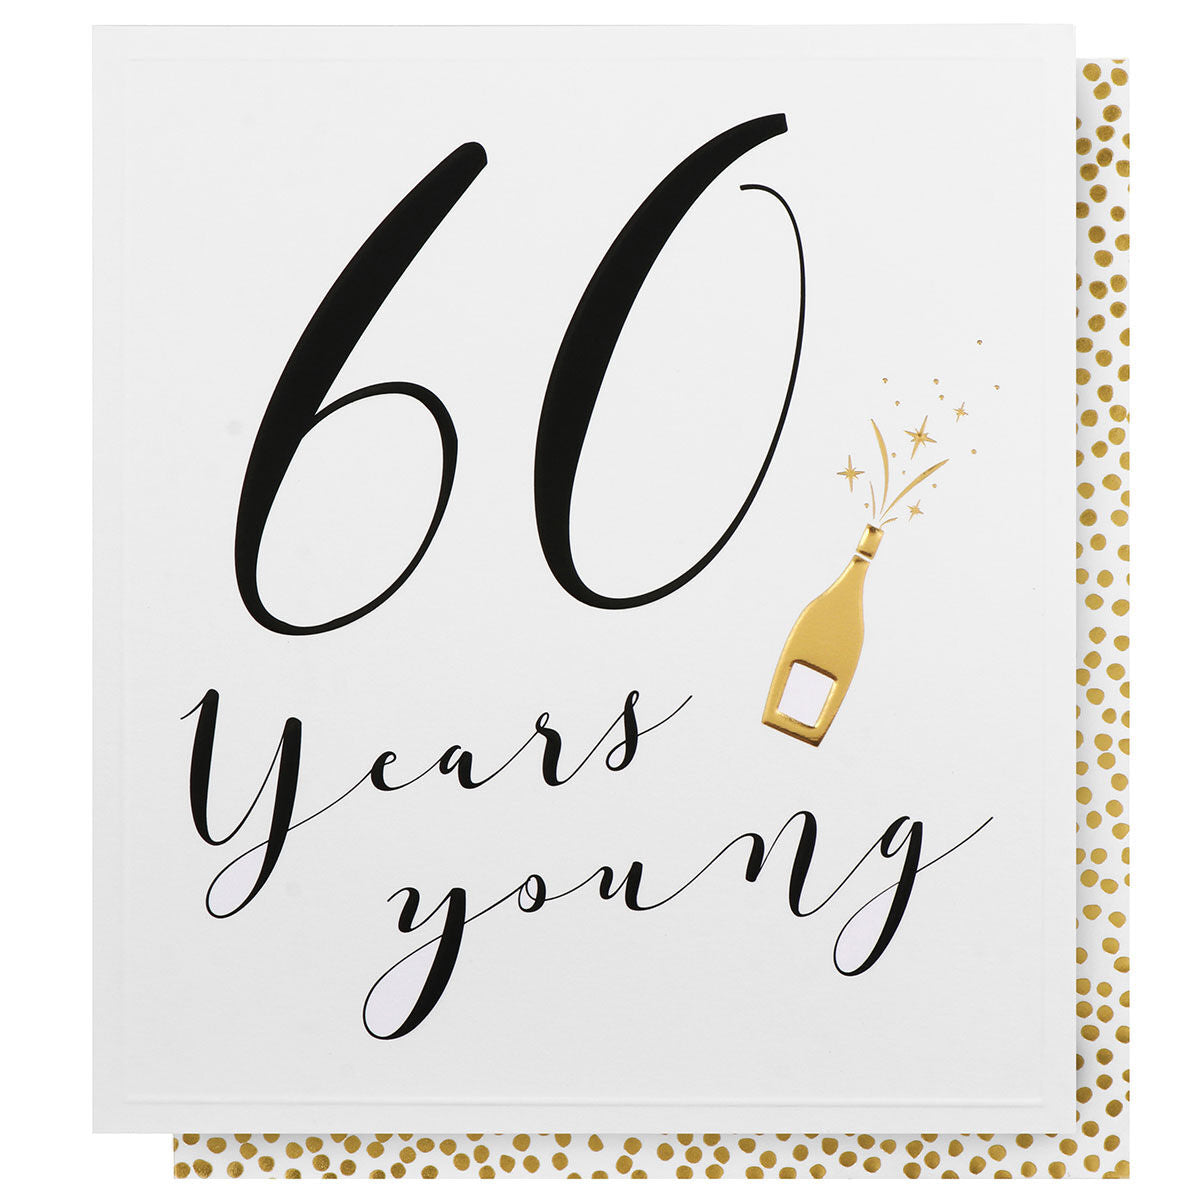 60th Birthday Card - No Frills Golden Champagne Popping